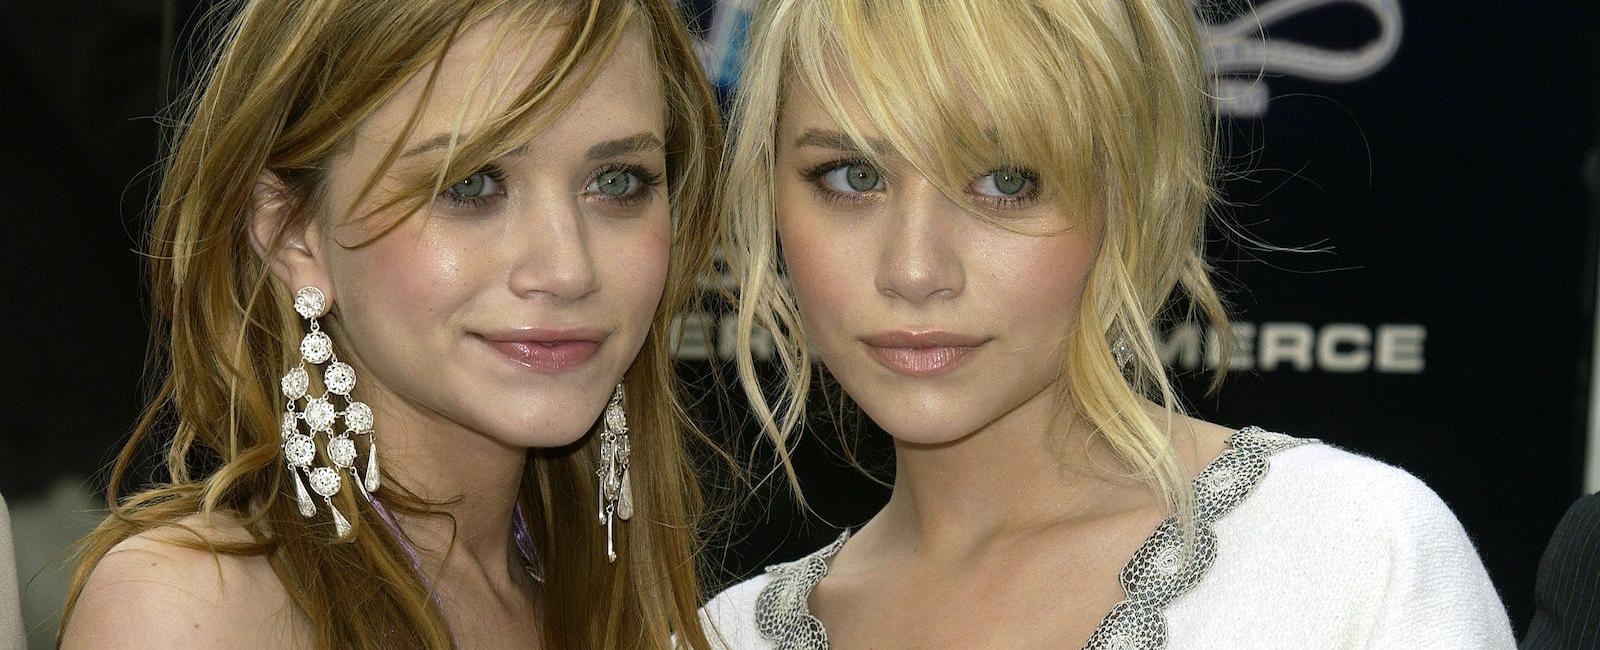 People assume the olsen twins mary kate and ashley are identical twins ...